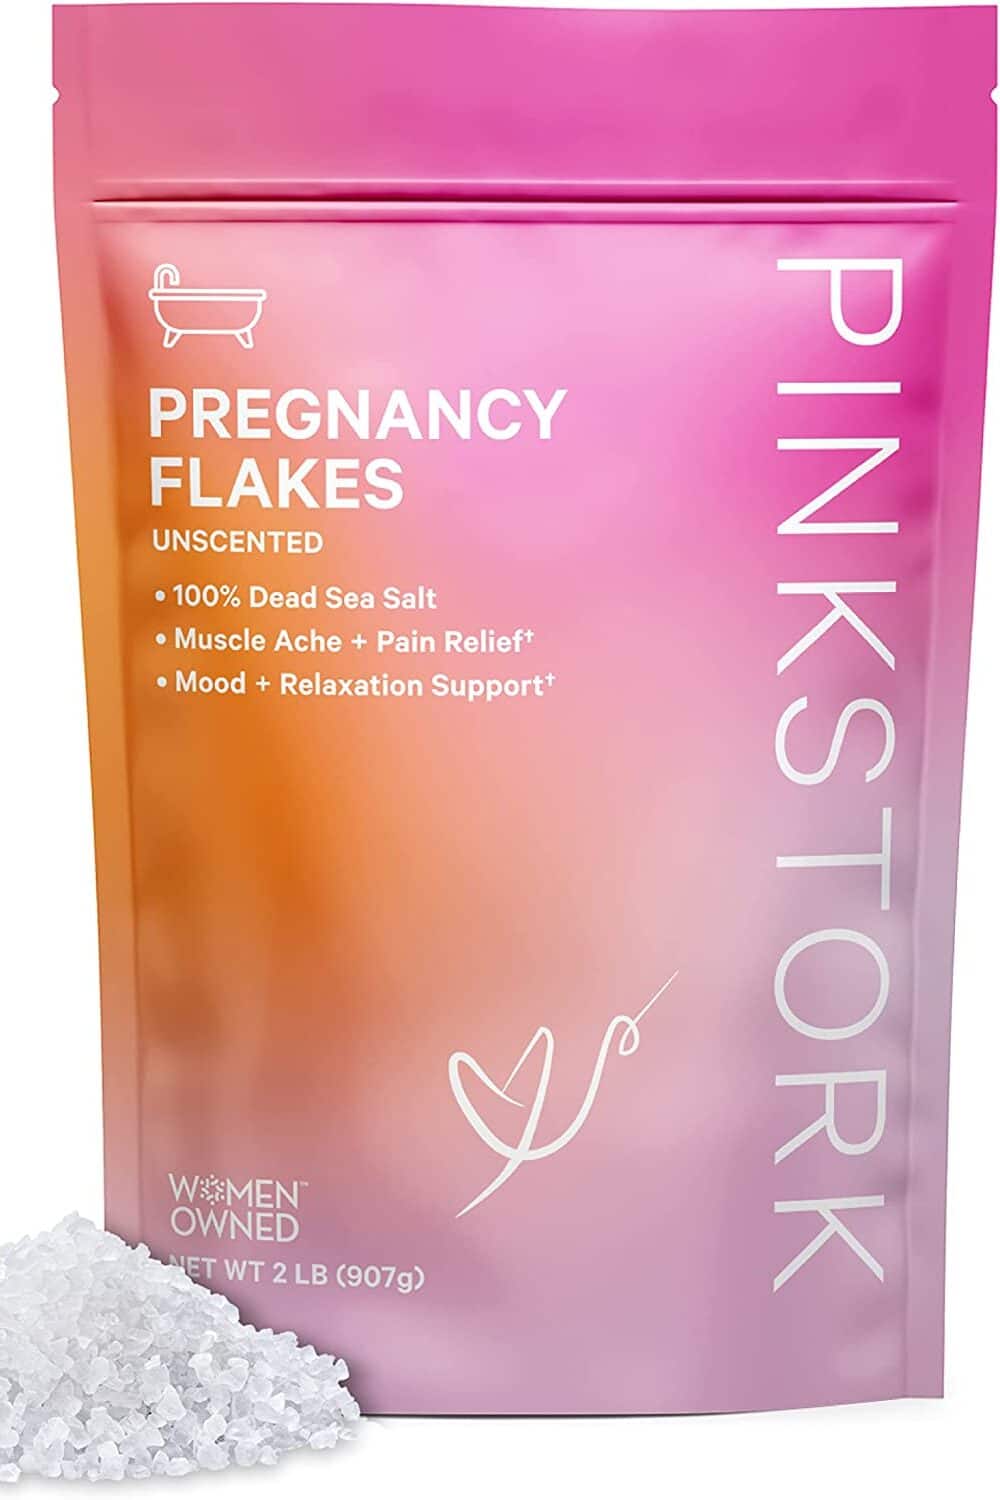 Are you looking for a relaxing gift for your pregnant friend? Give her some pregnancy flakes! | The Dating Divas